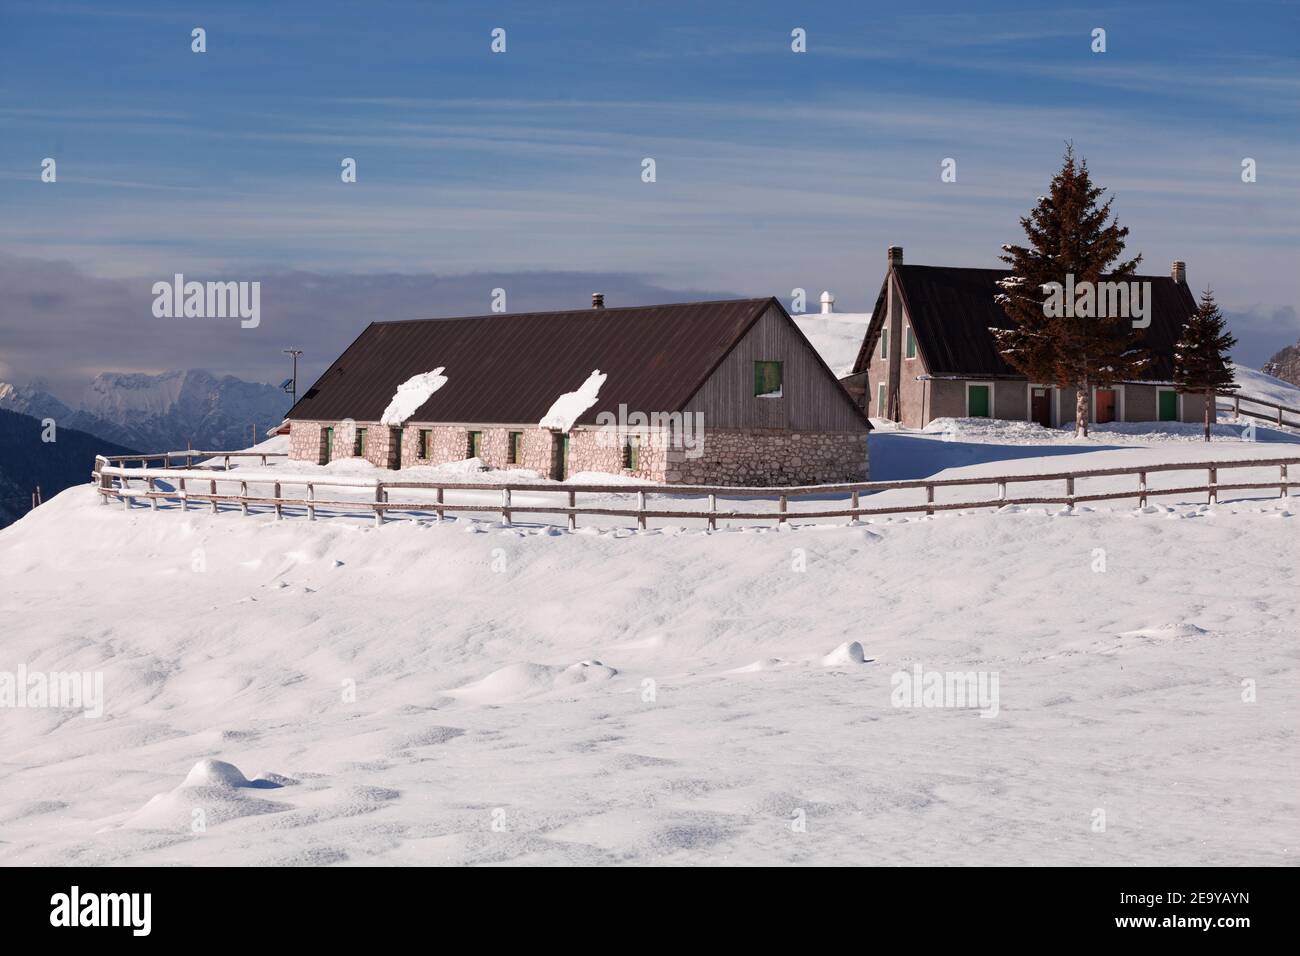 Mountain farm in winter with snowy surroundings and high mountain background Stock Photo